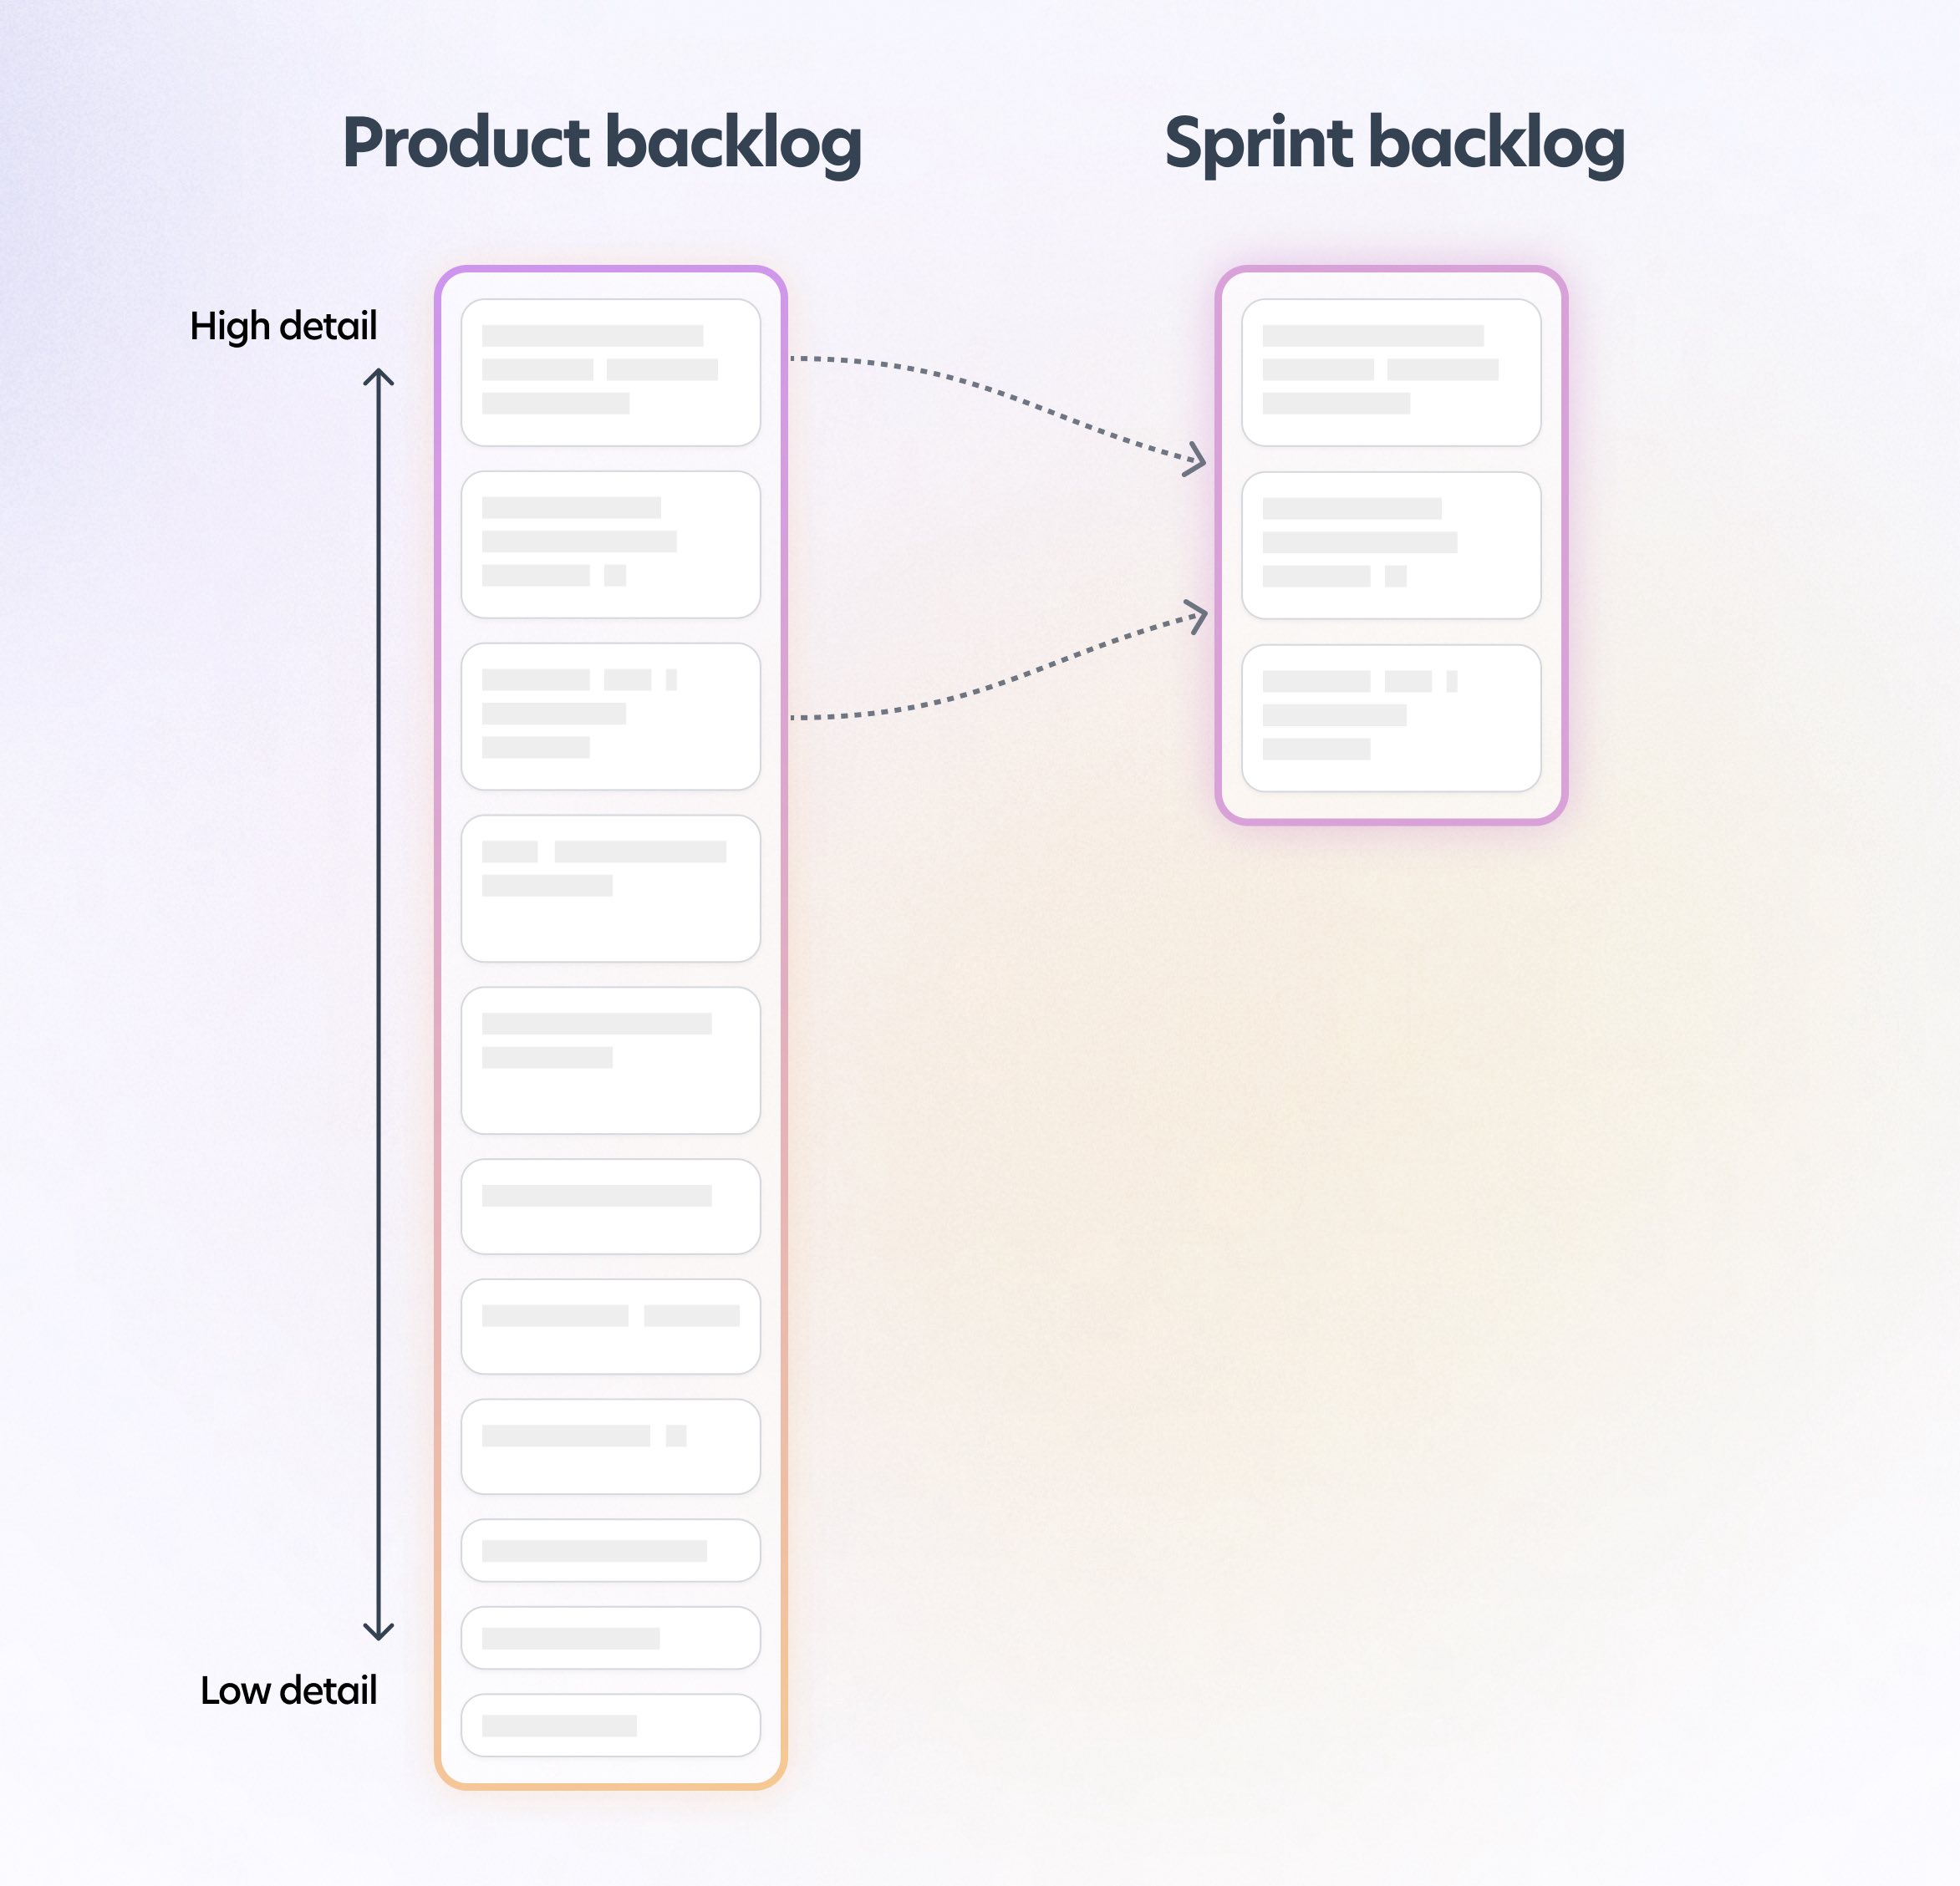 An illustrative example of a product and sprint backlog